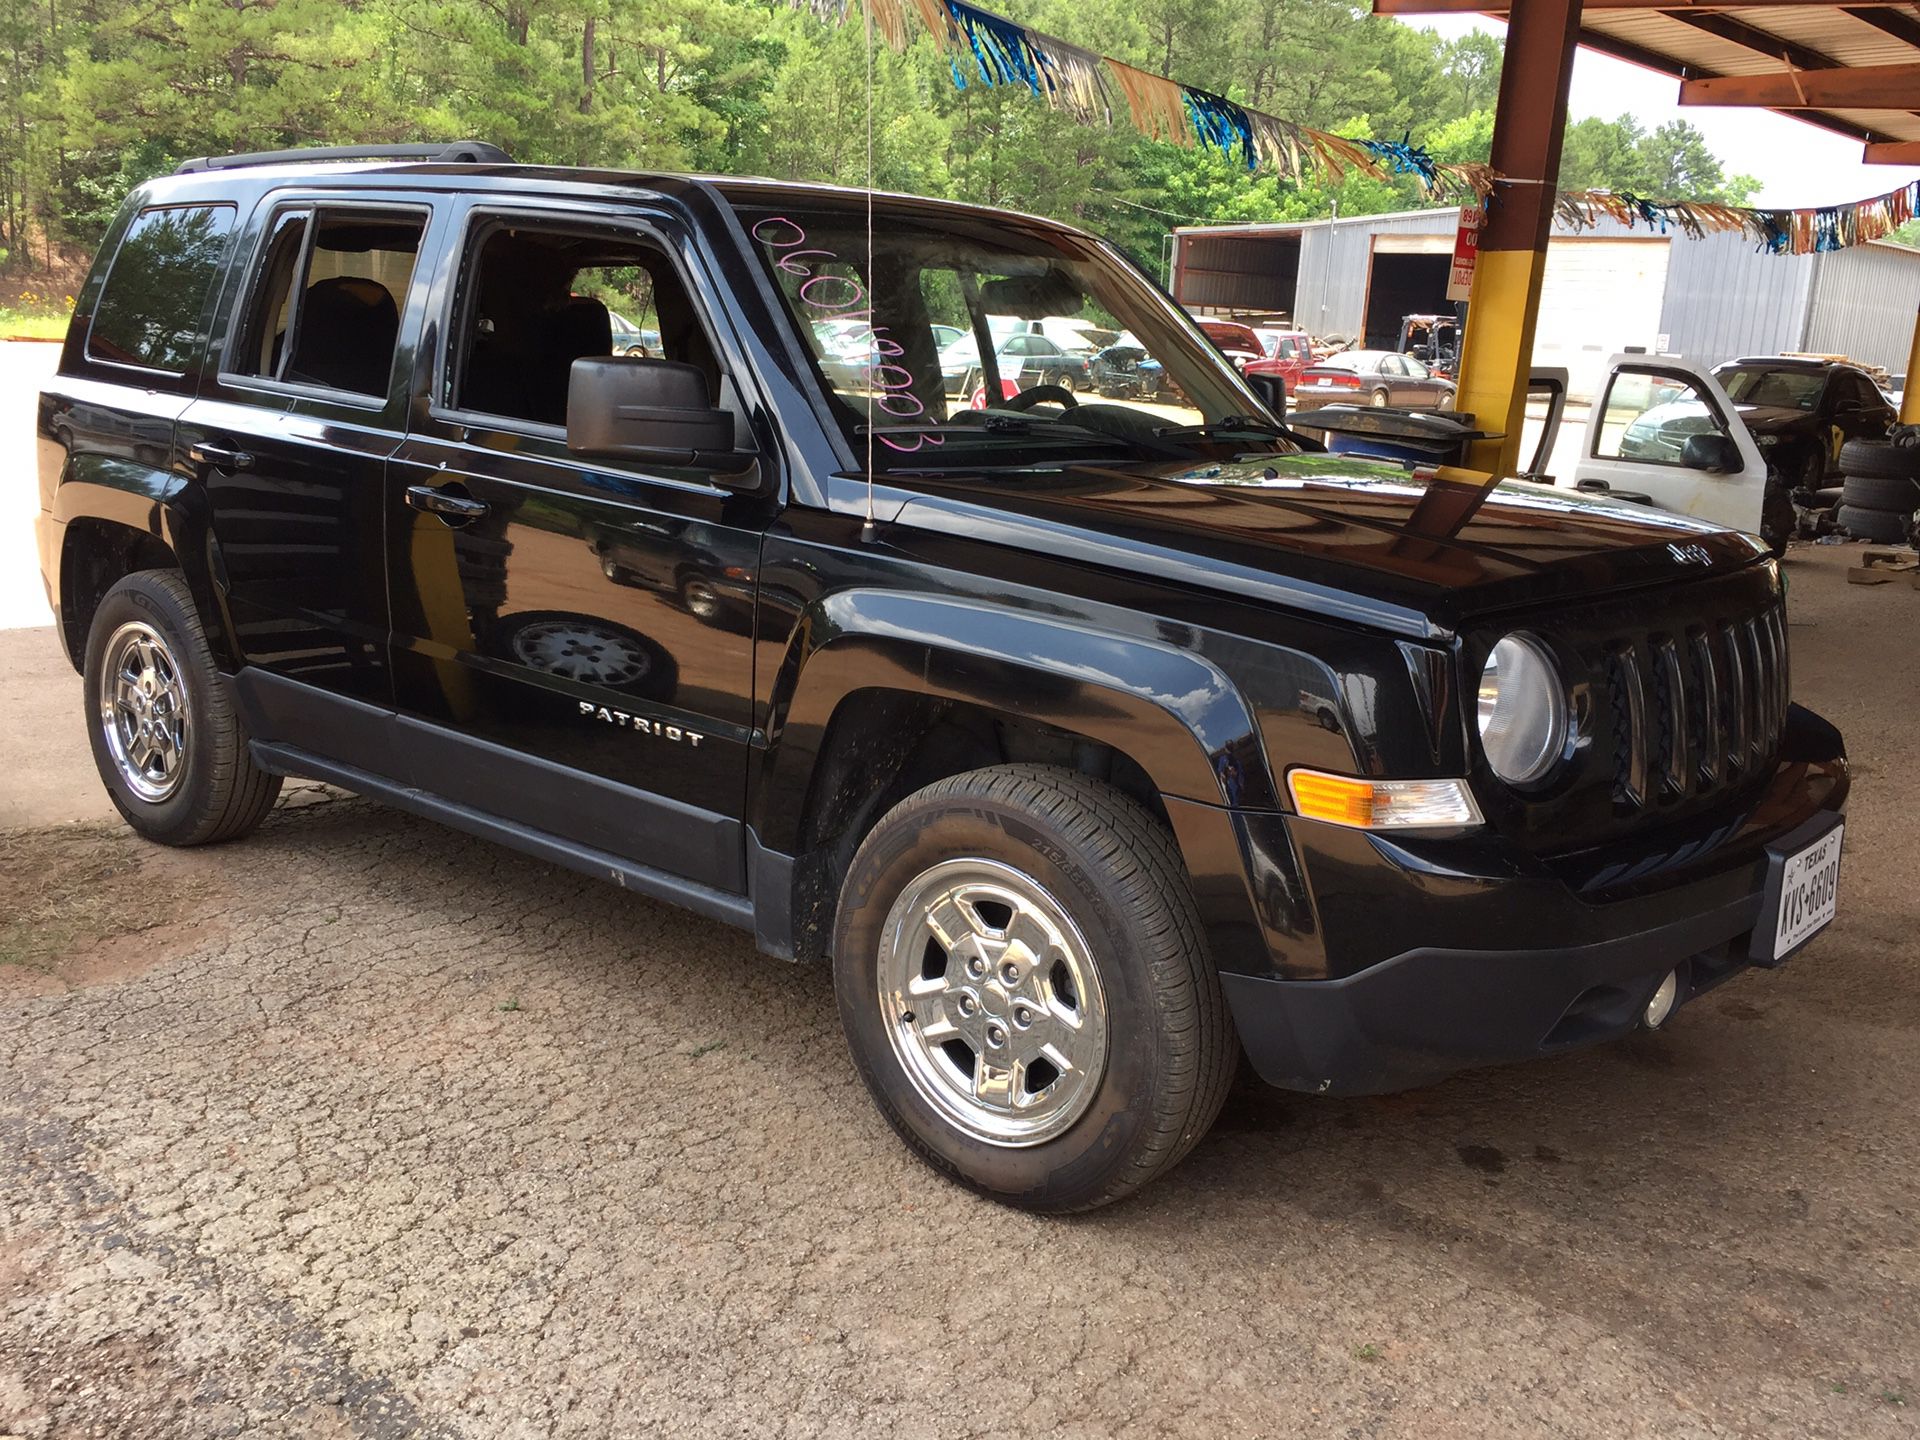 FOR PARTS 2013 Jeep Patriot good running engine